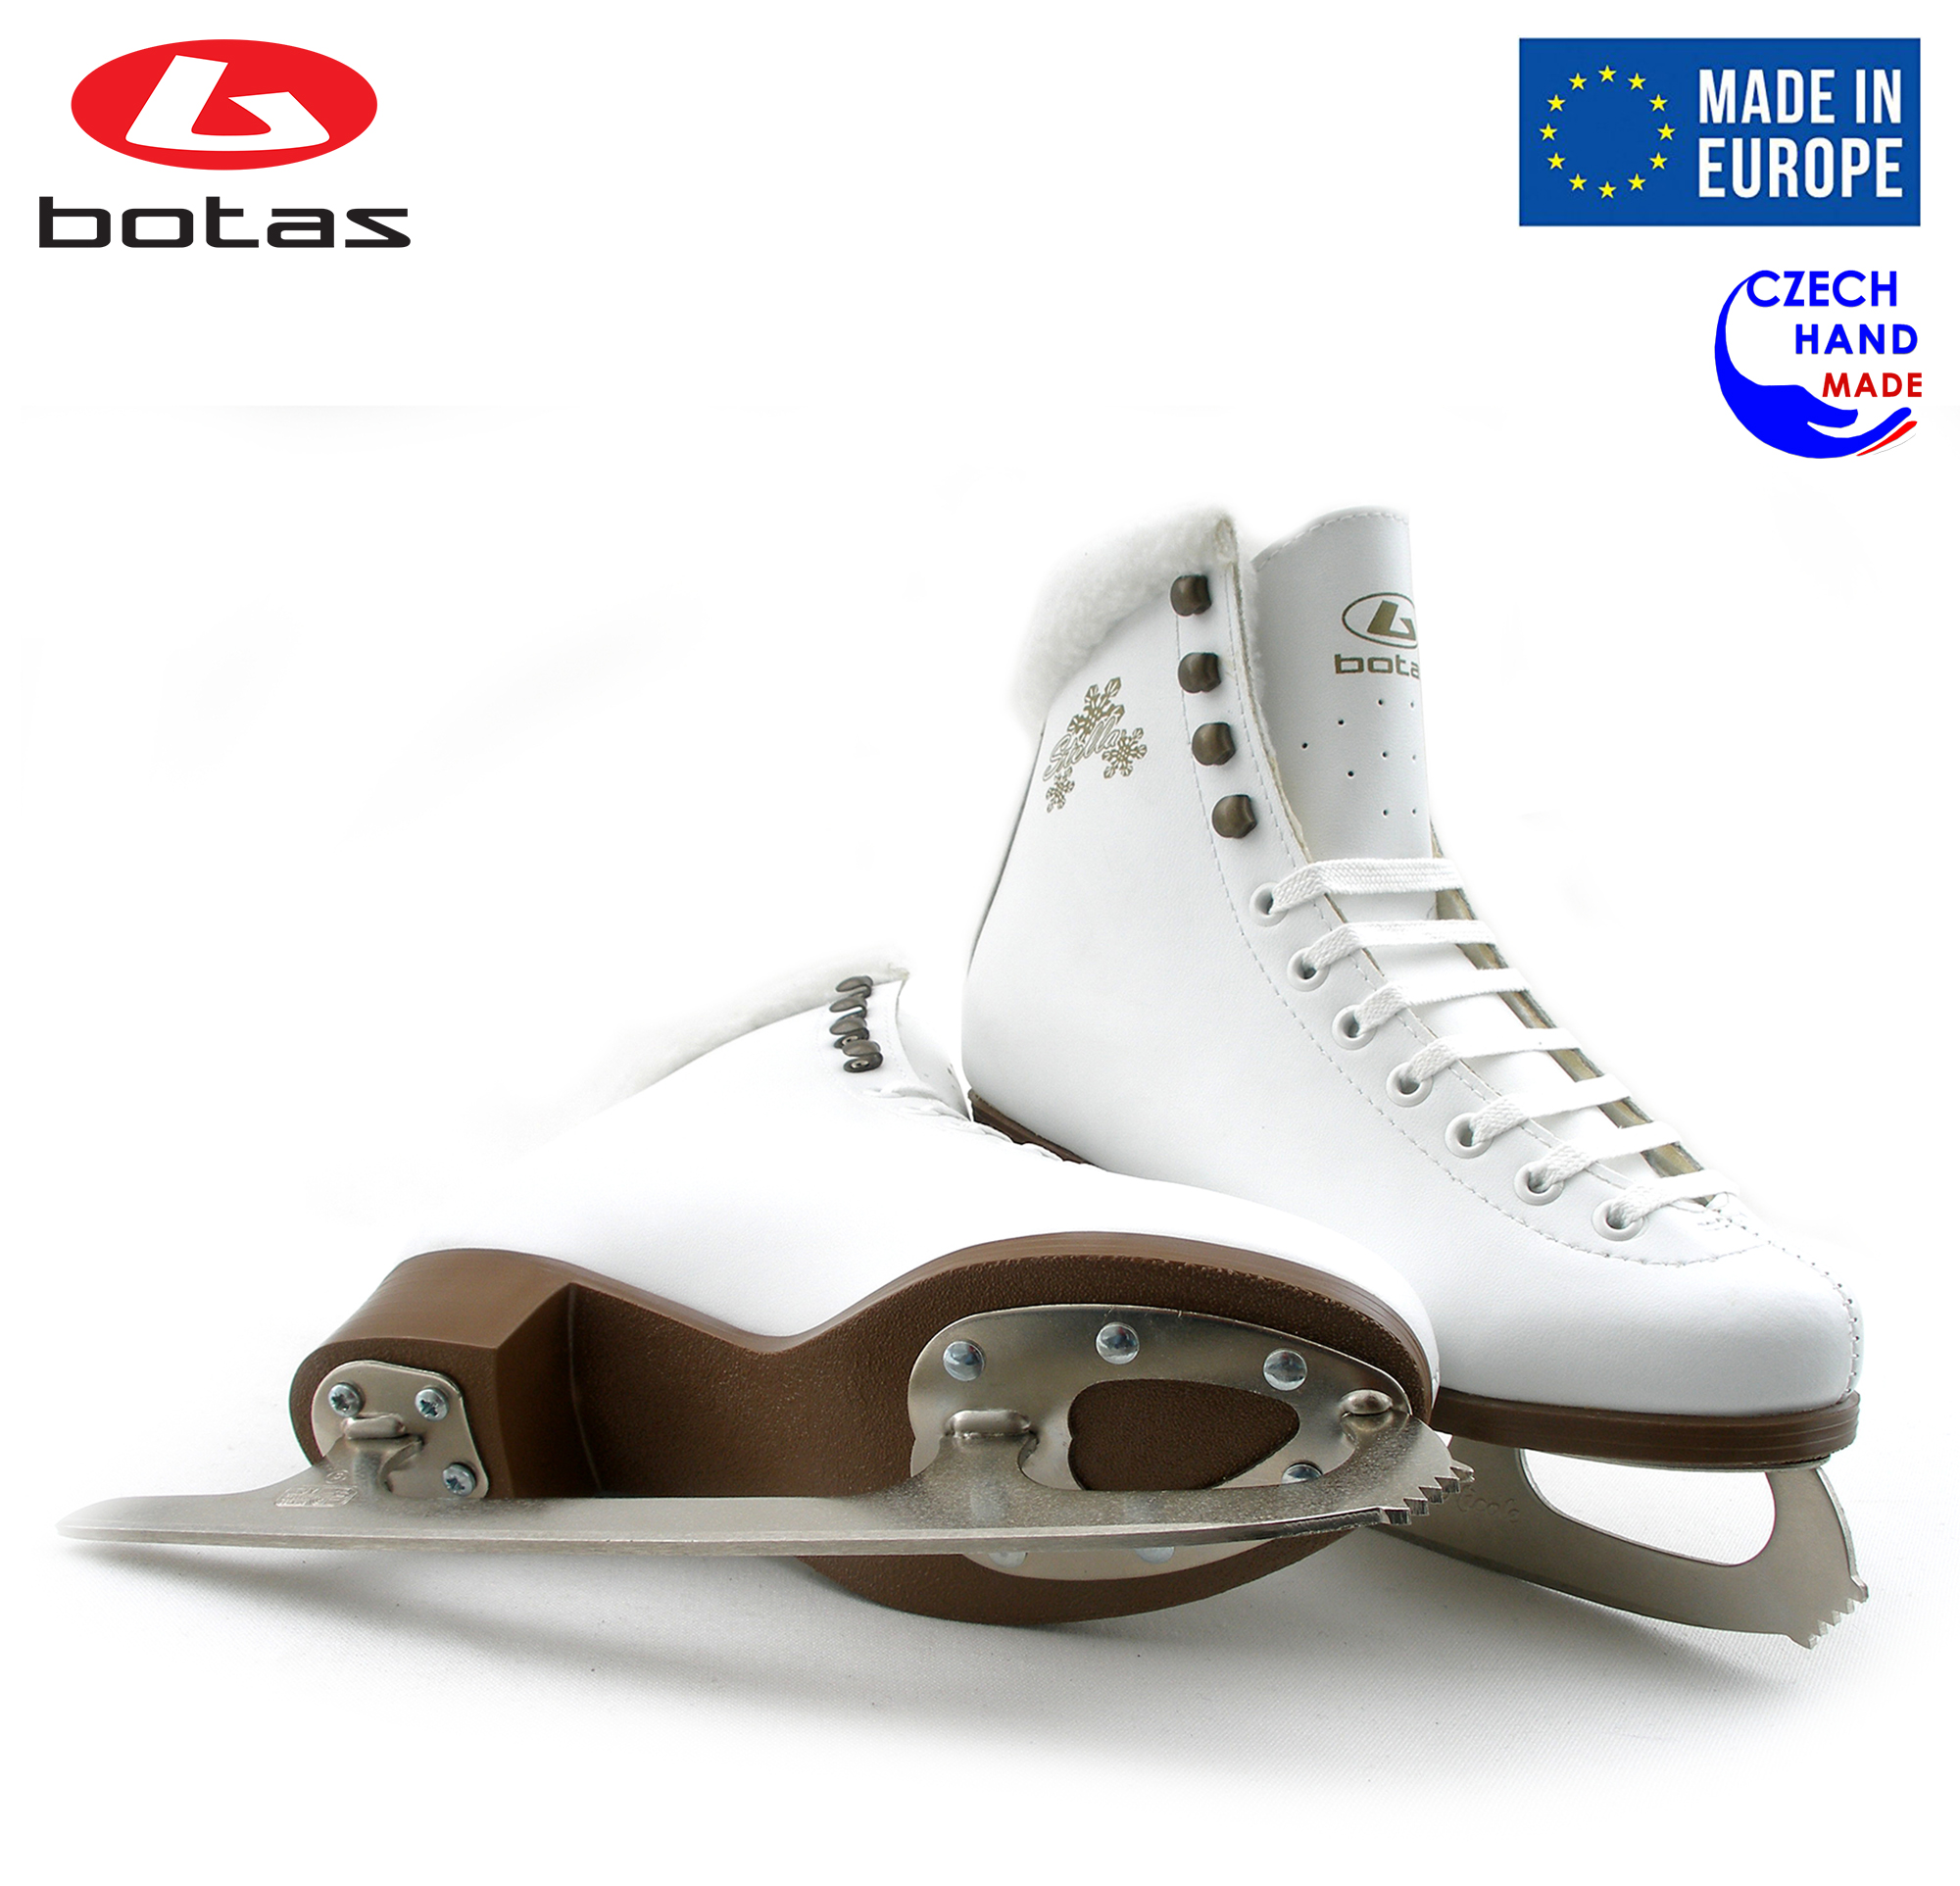 BOTAS - model: STELLA / Made in Europe (Czech Republic) / Innovated Elegant Figure Ice Skates for Girls, Kids / with Plush Collar / NICOLE blades / Color: White, Size: Kids 10 - image 2 of 6